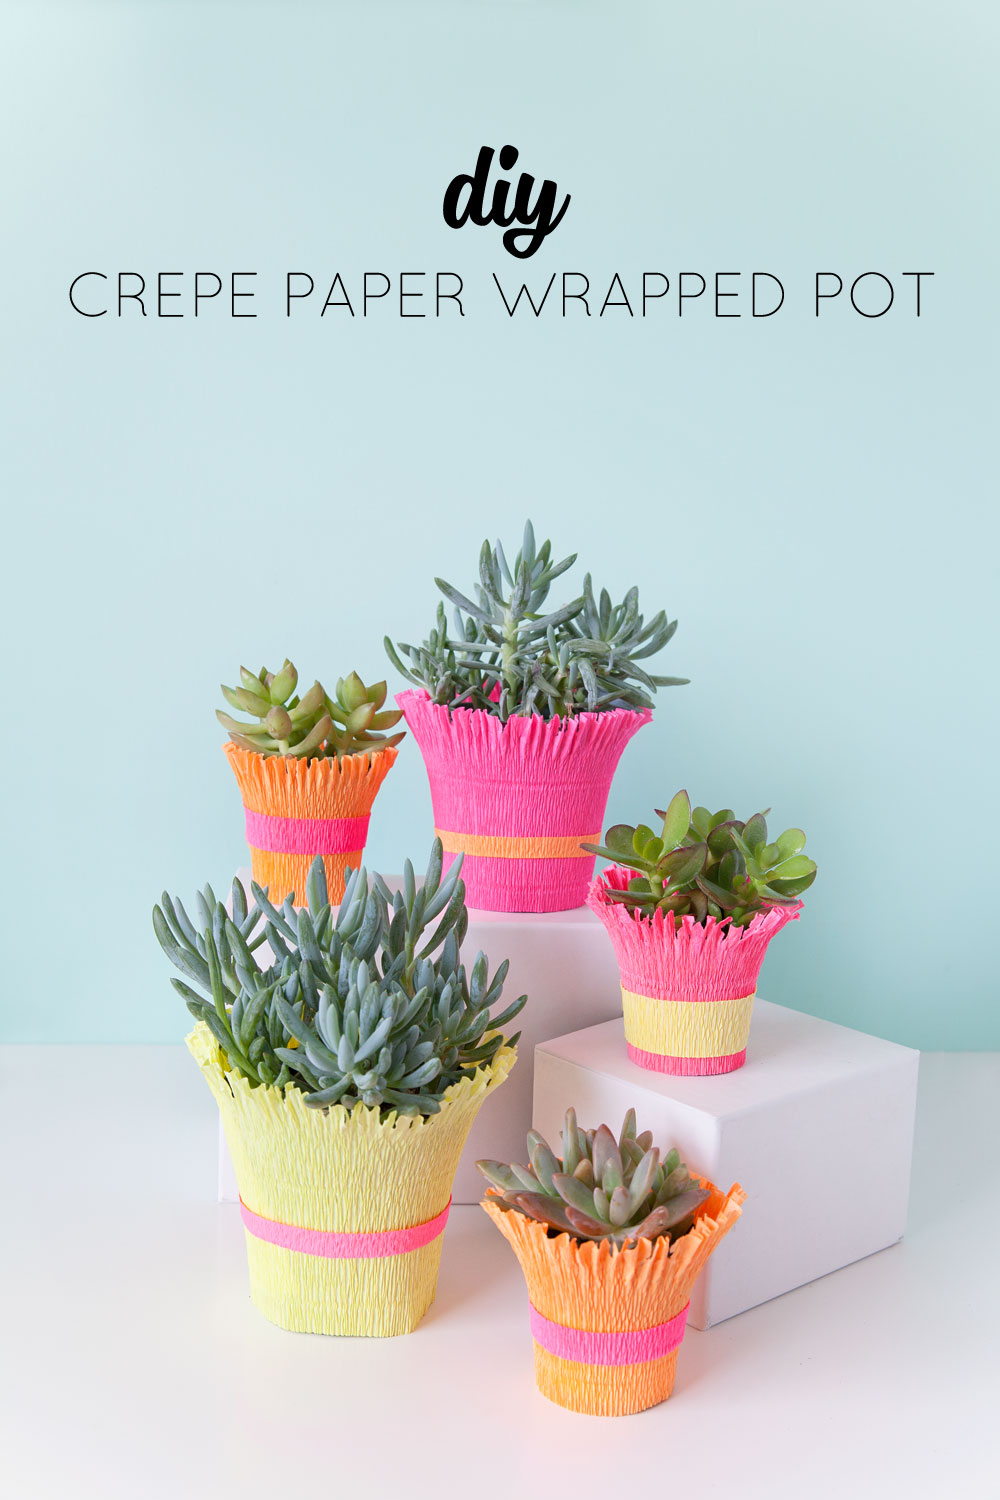 diy-crepe-paper-wrapped-pots--simple-and-only-takes-a-few-min